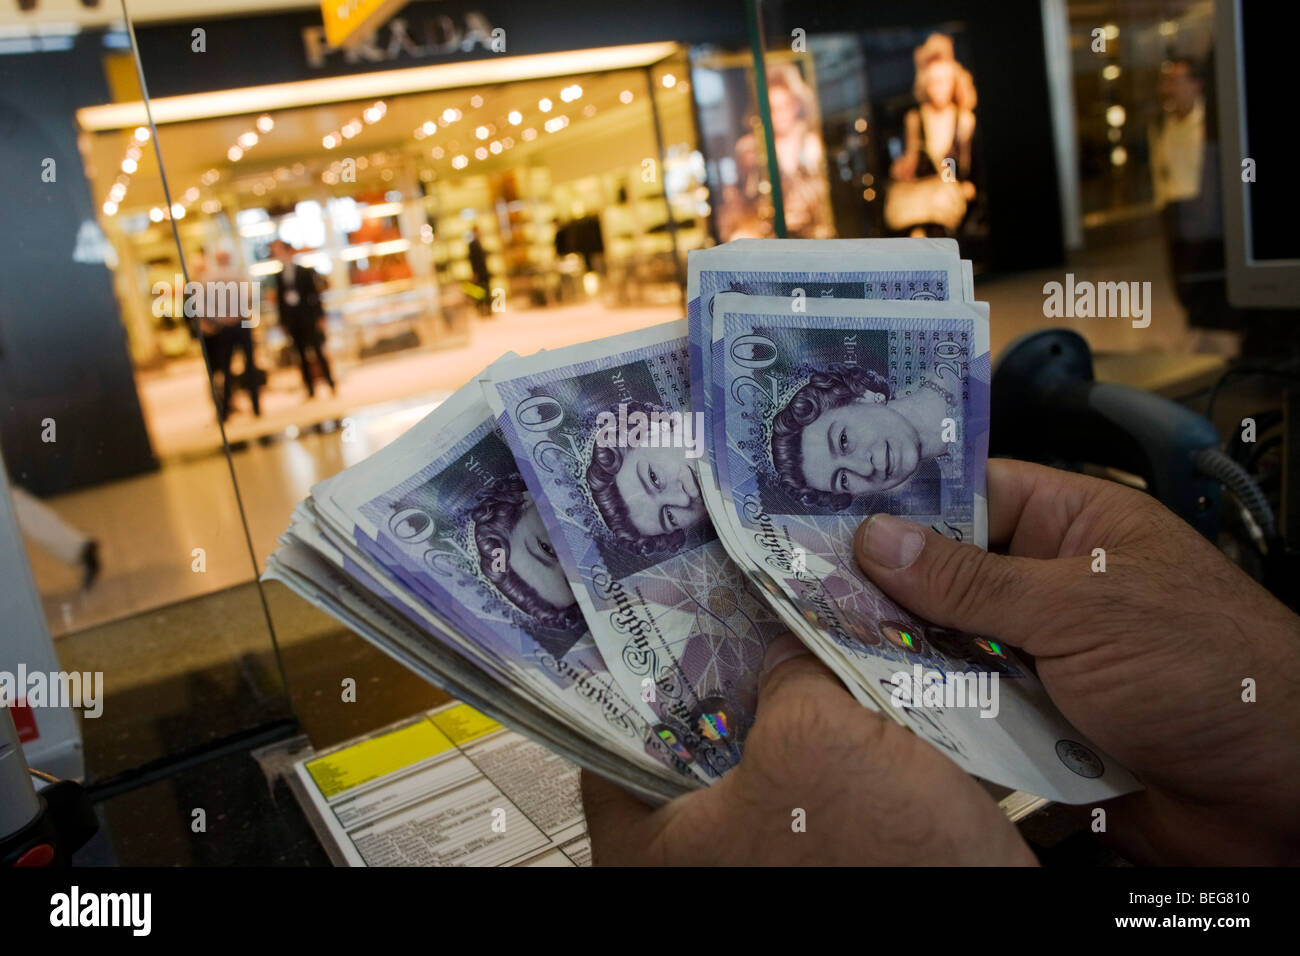 An assistant counts through Pounds Sterling notes at the Travelex bureau de change at Heathrow Airport's Terminal 5. Stock Photo